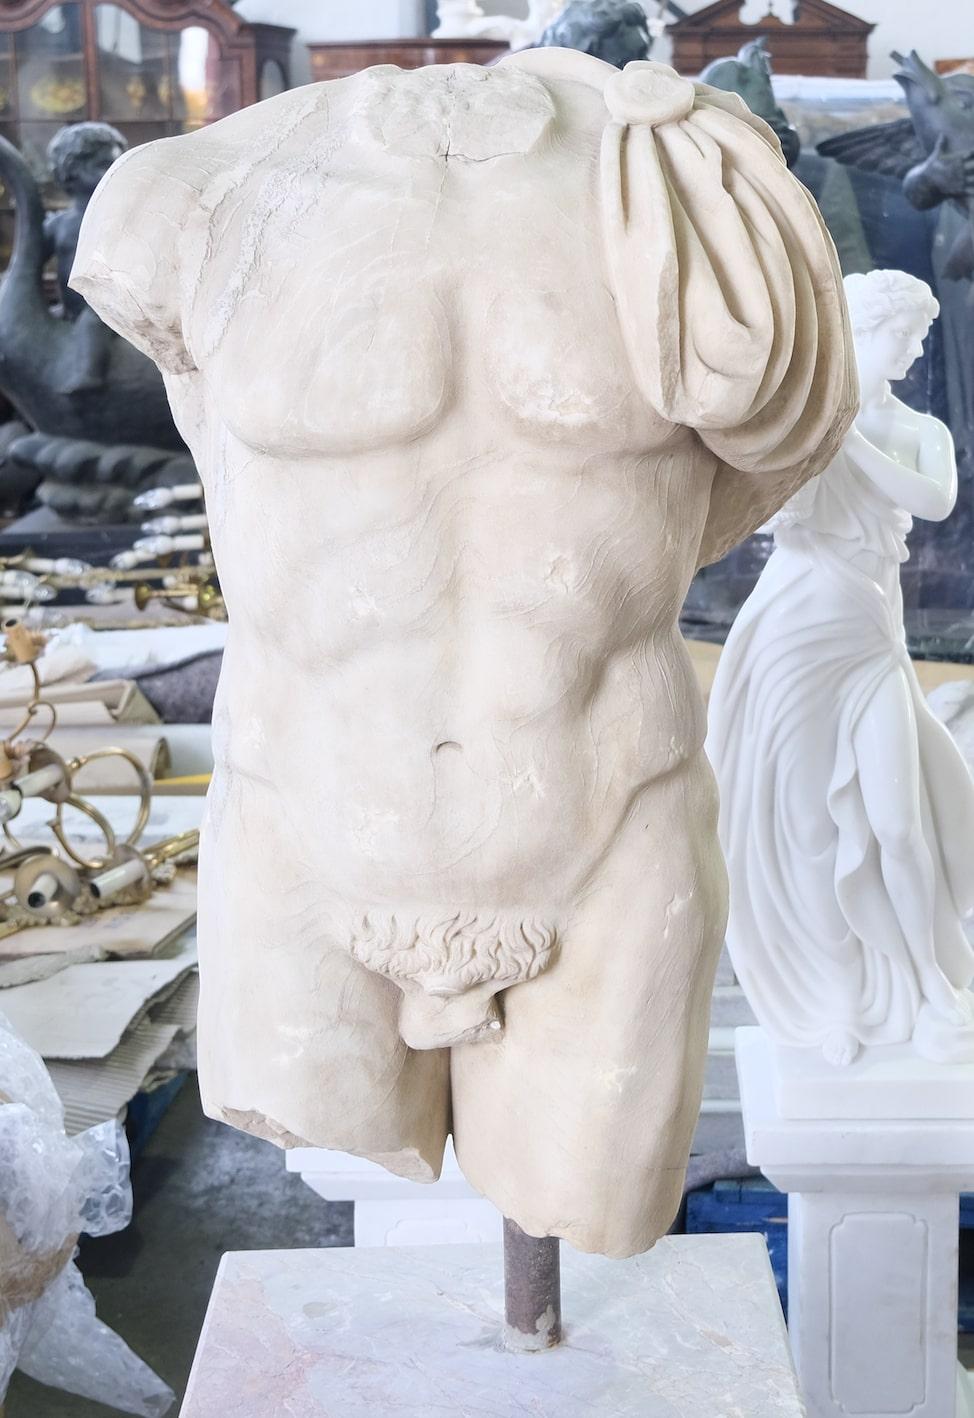 A life-size hand carved 20th century Roman Torso. The torso is carved from weathered statutory marble on a travertine base.

One of the most striking objects on display in the Mary and Michael Jaharis Galleries of Greek, Roman, and Byzantine Art at